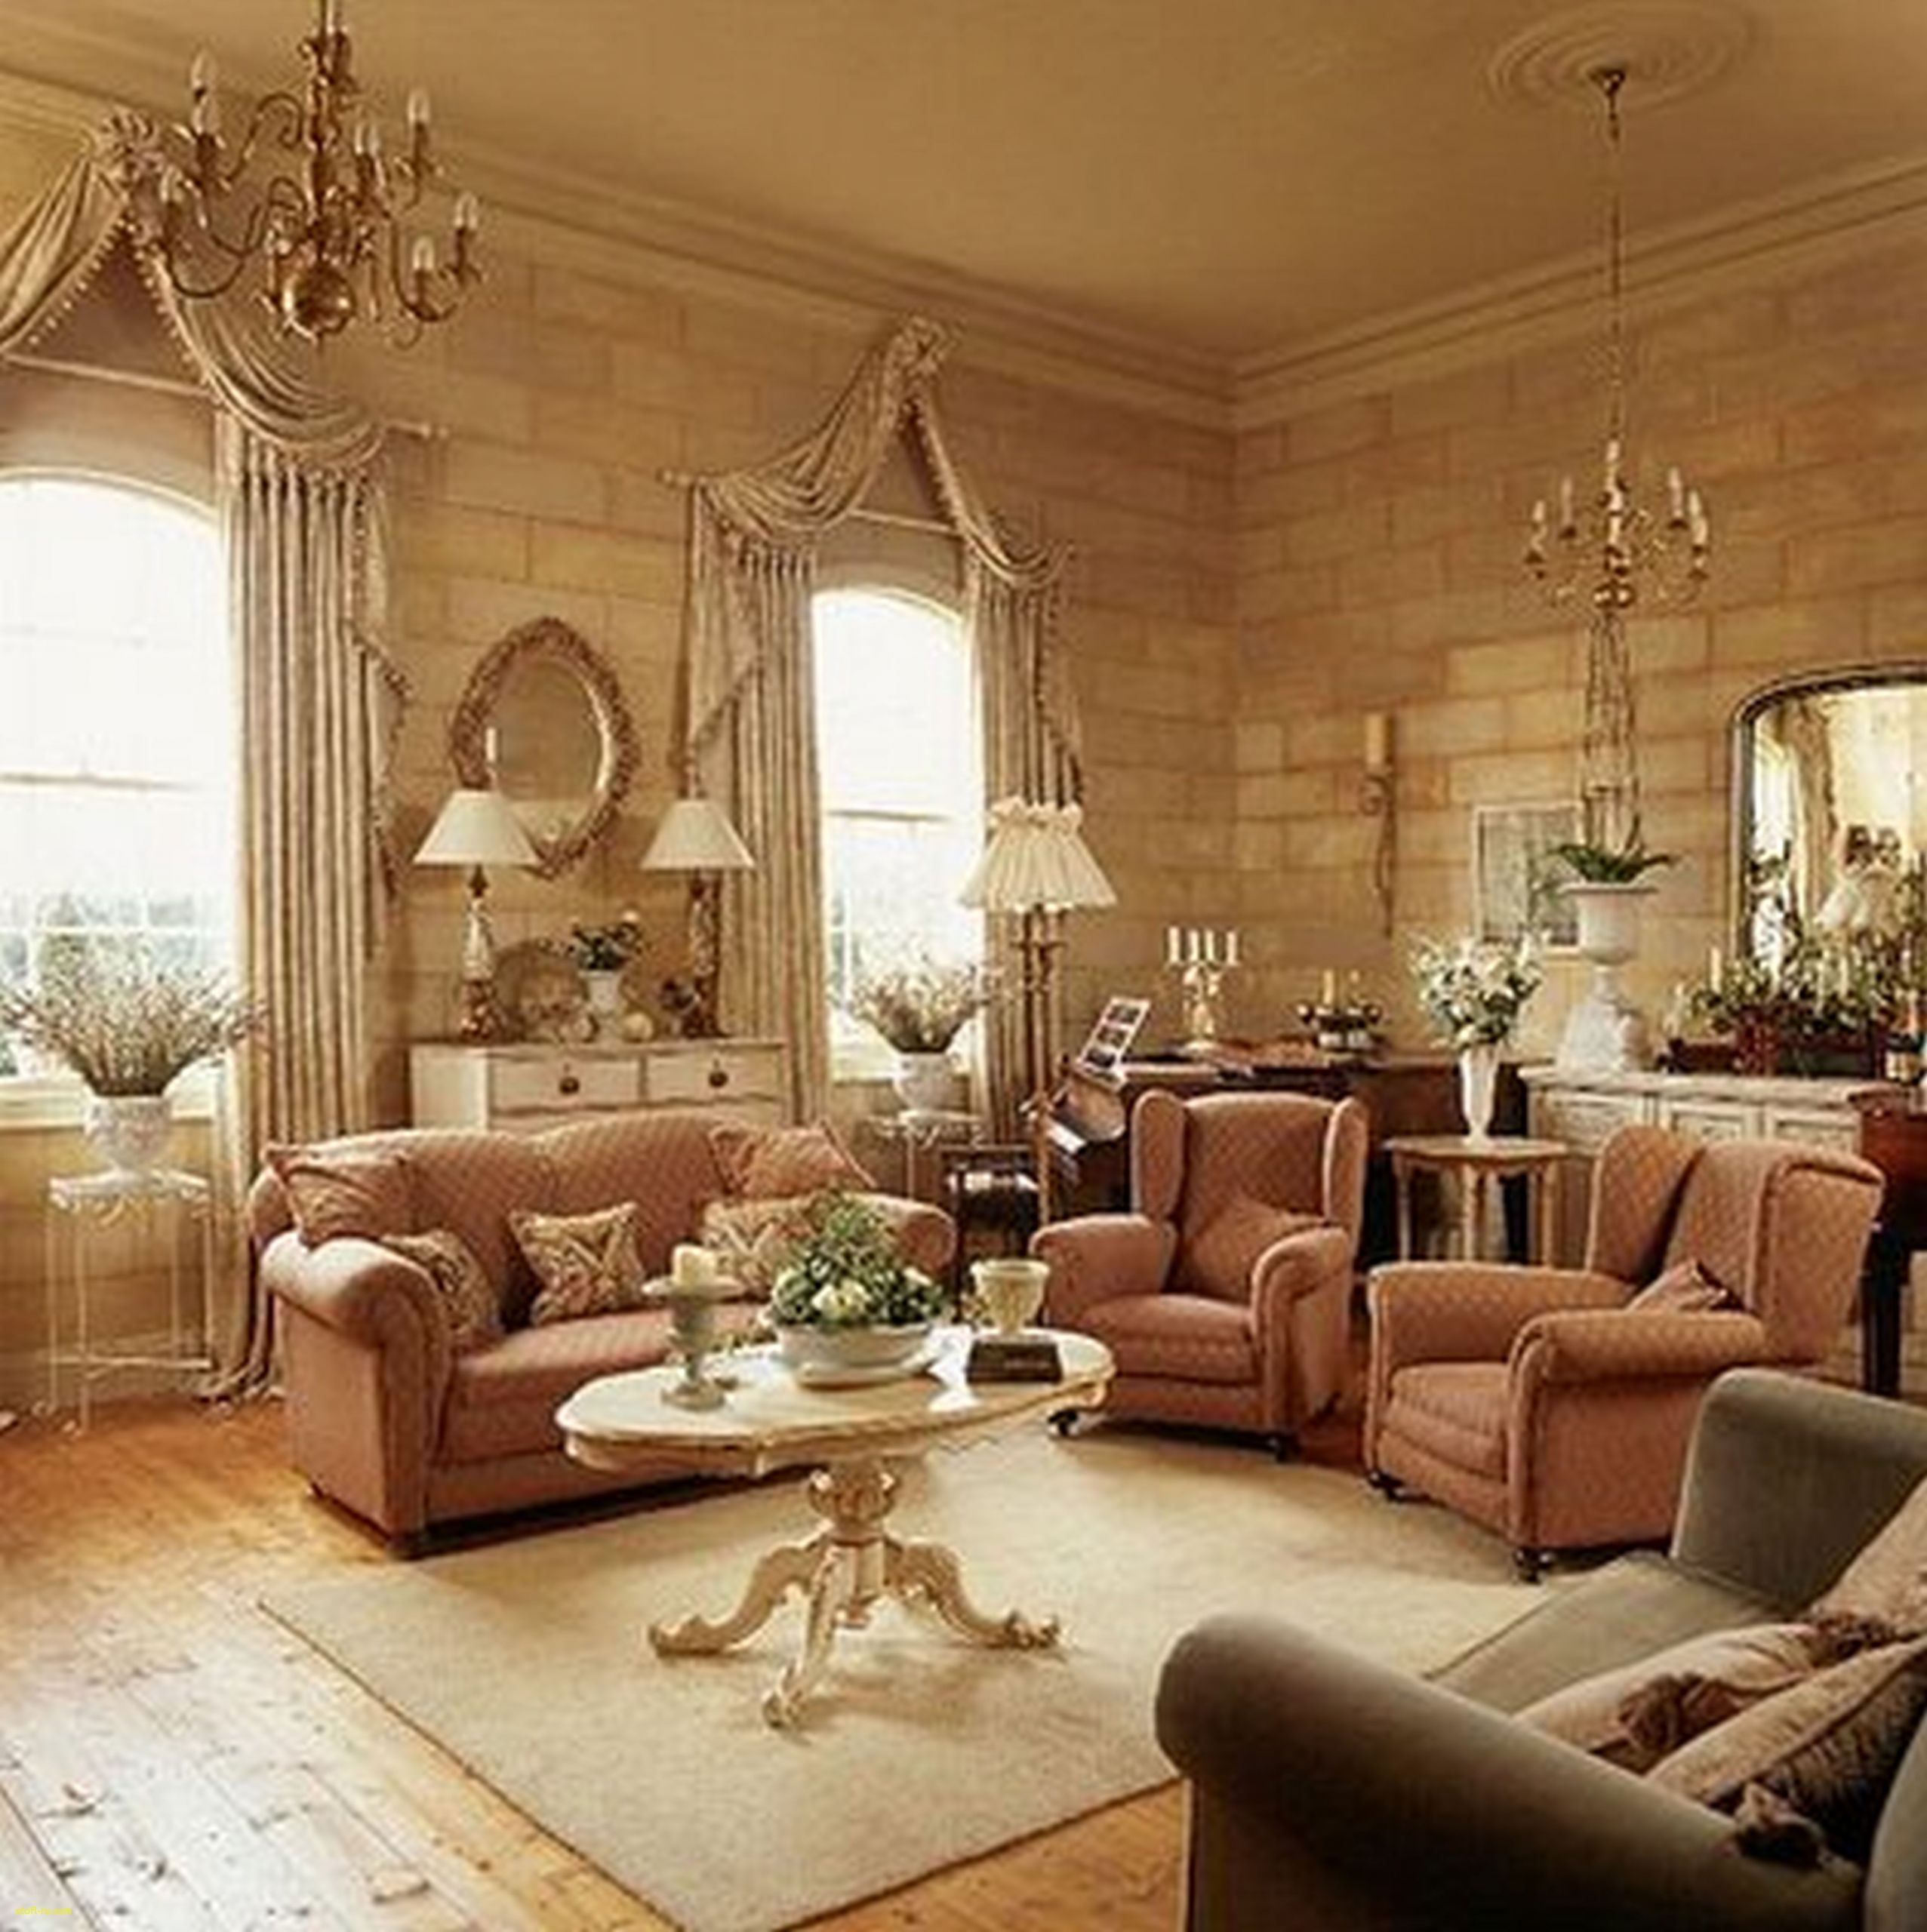 country home interior design pictures country home interior design ideas best living room traditional decorating ideas awesome shaker chairs 0d